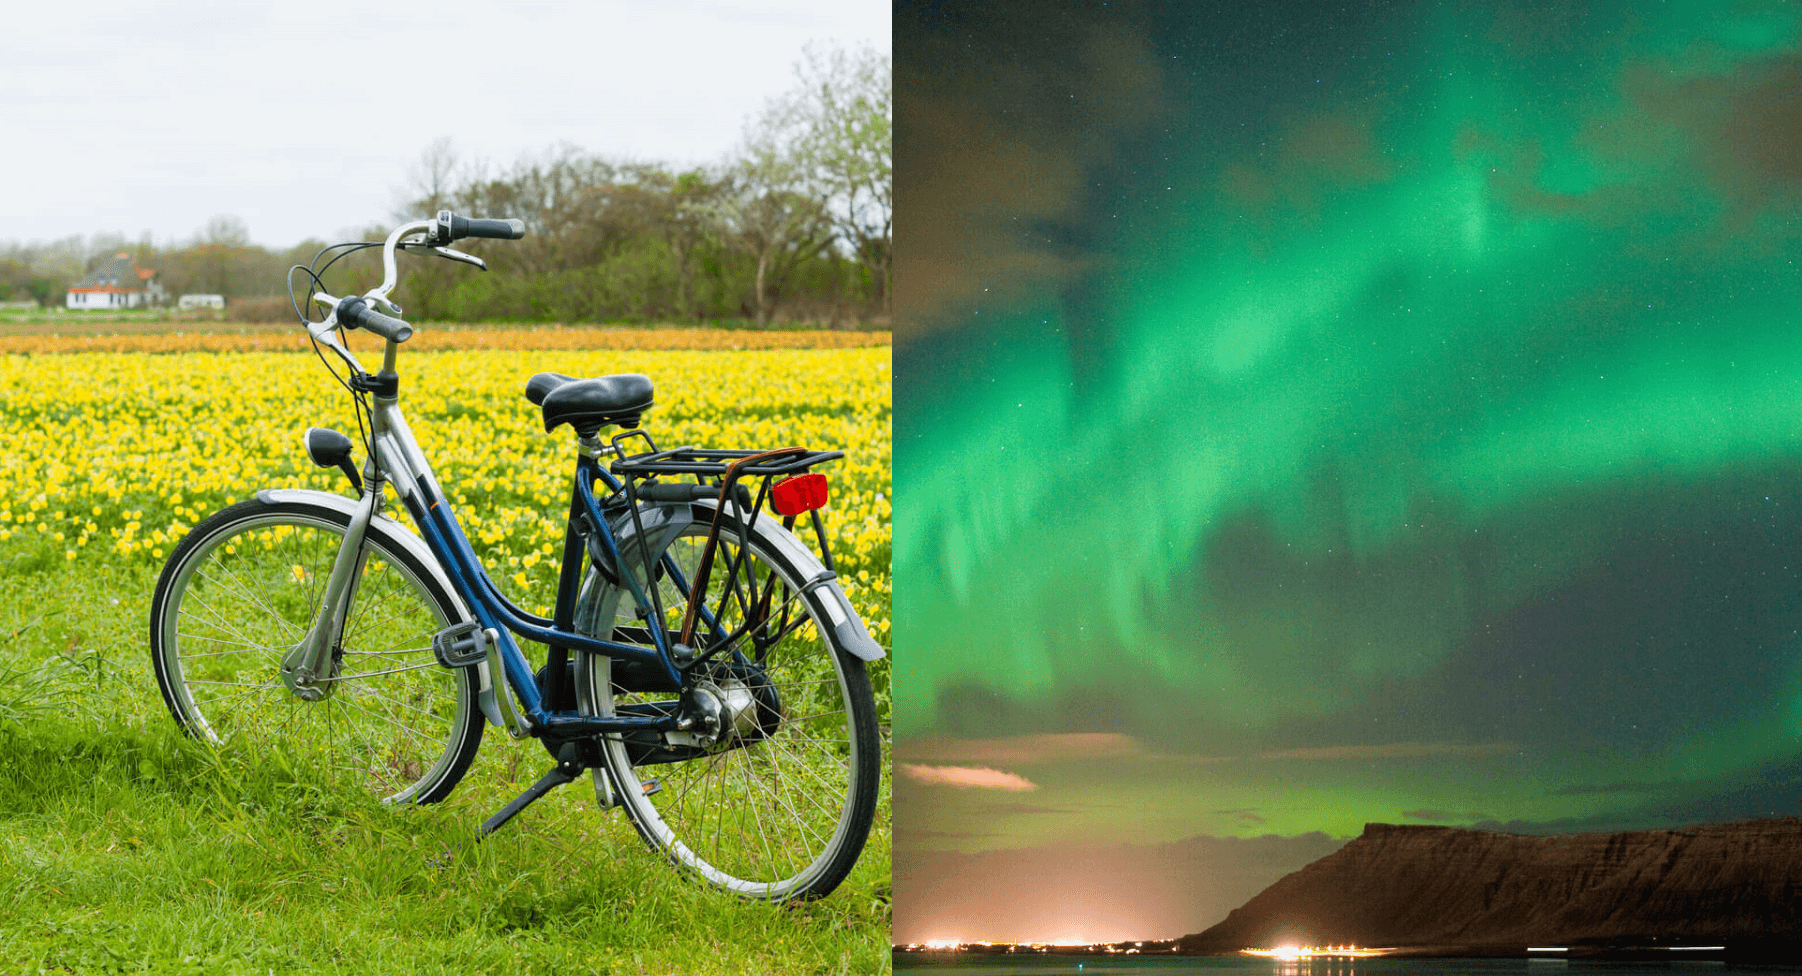 Flight deals from Montreal, Canada to both Amsterdam, Netherlands and Reykjavik, Iceland | Secret Flying